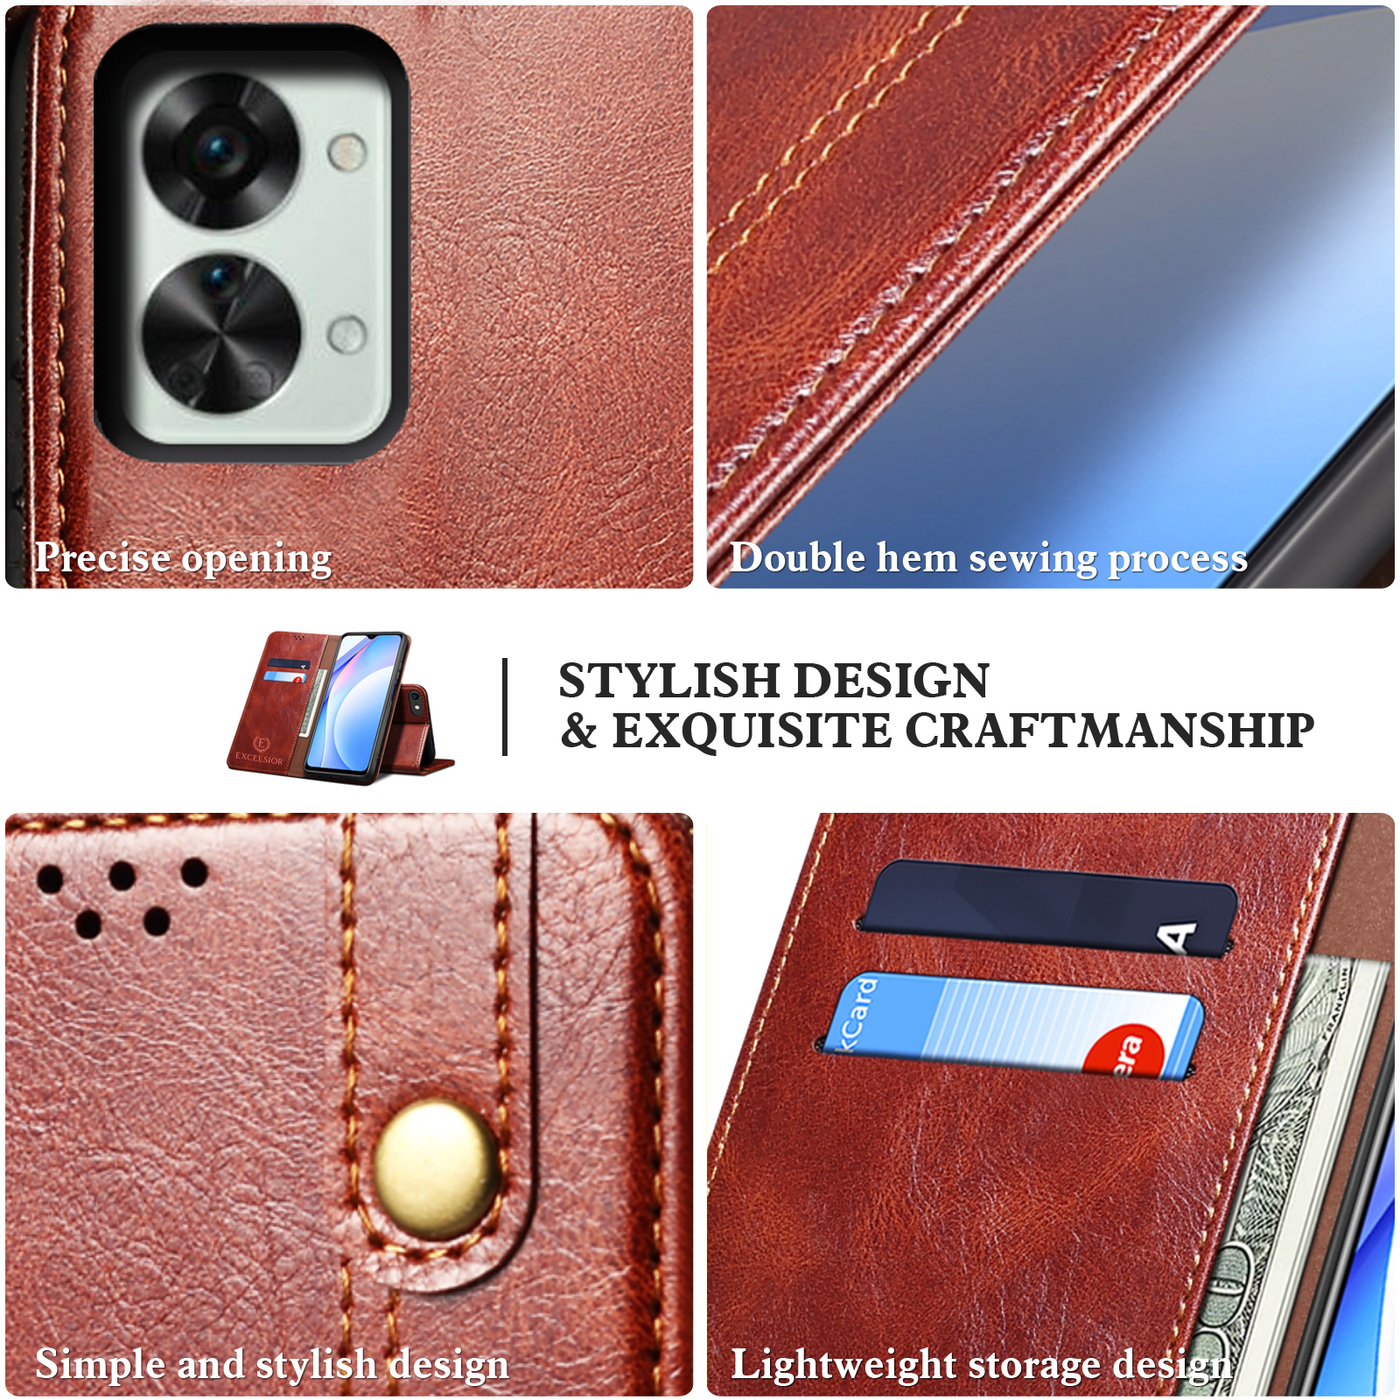 Excelsior Premium Vintage PU Leather Wallet flip Cover Case For Oneplus Nord 2T